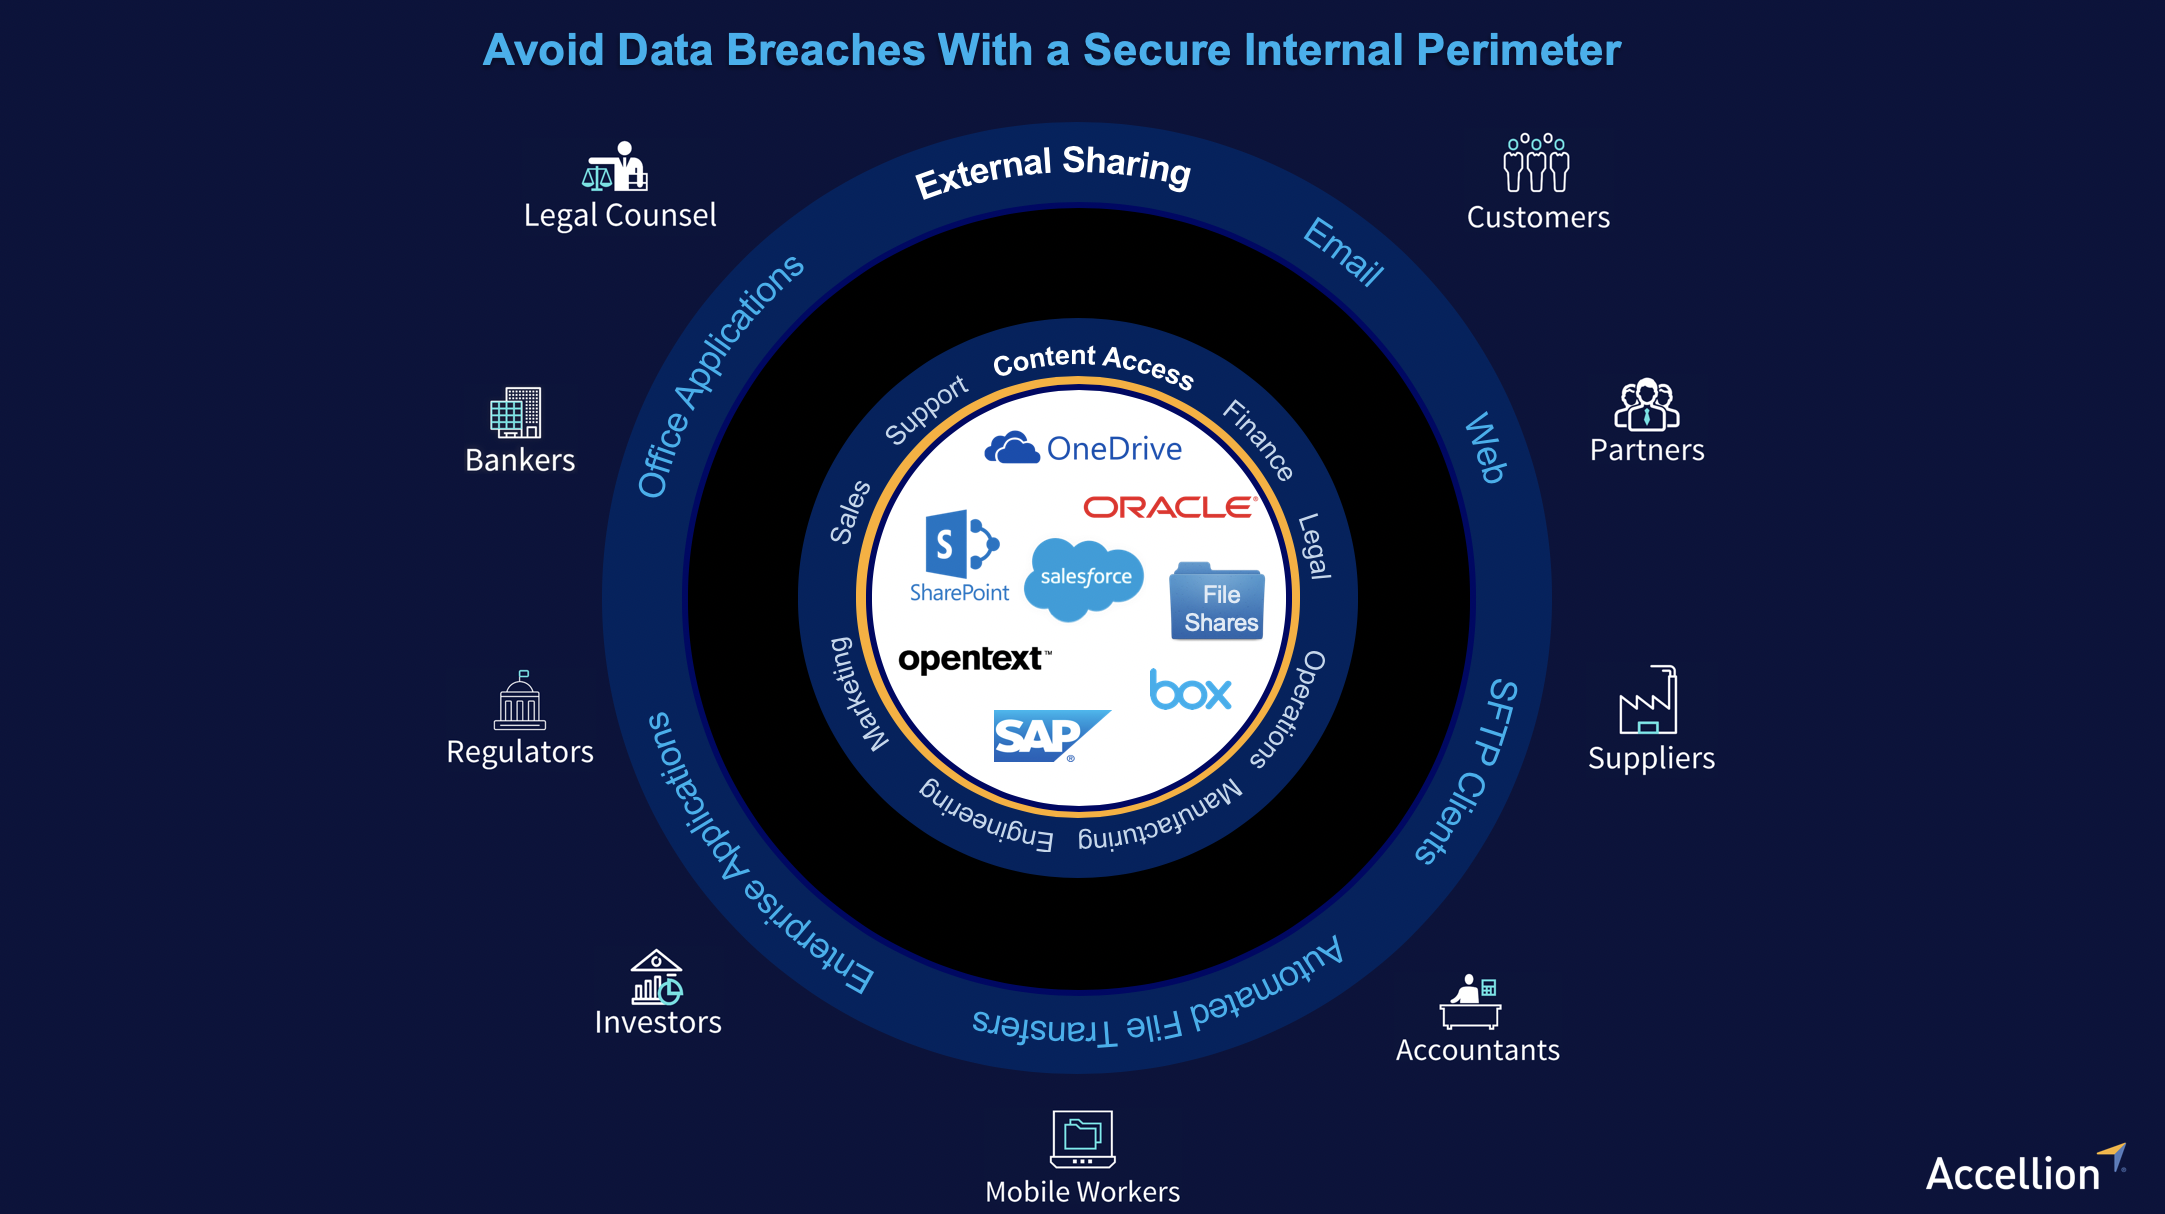 Avoid data breaches with a secure internal perimeter